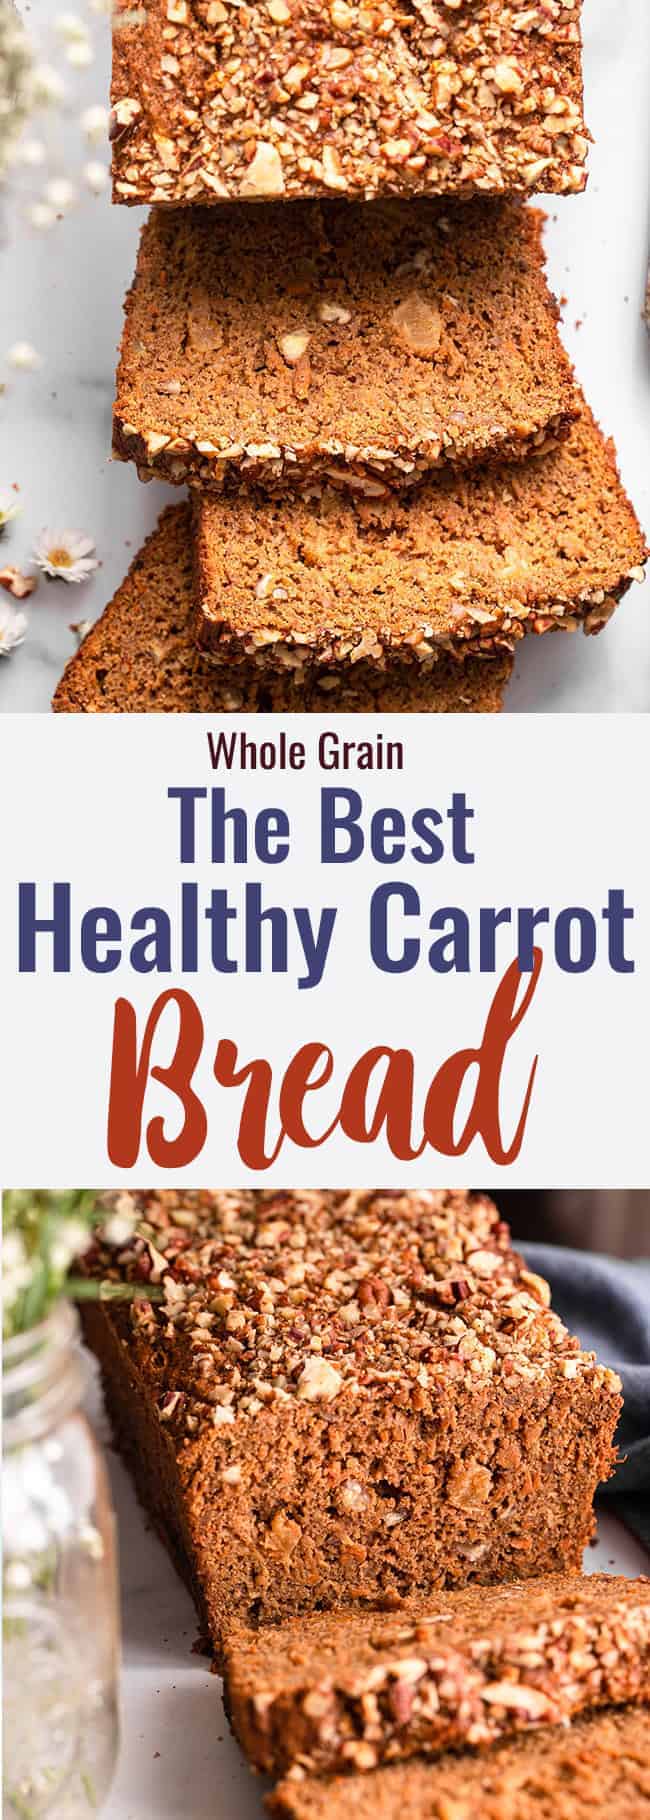 Healthy Carrot Bread collage photo